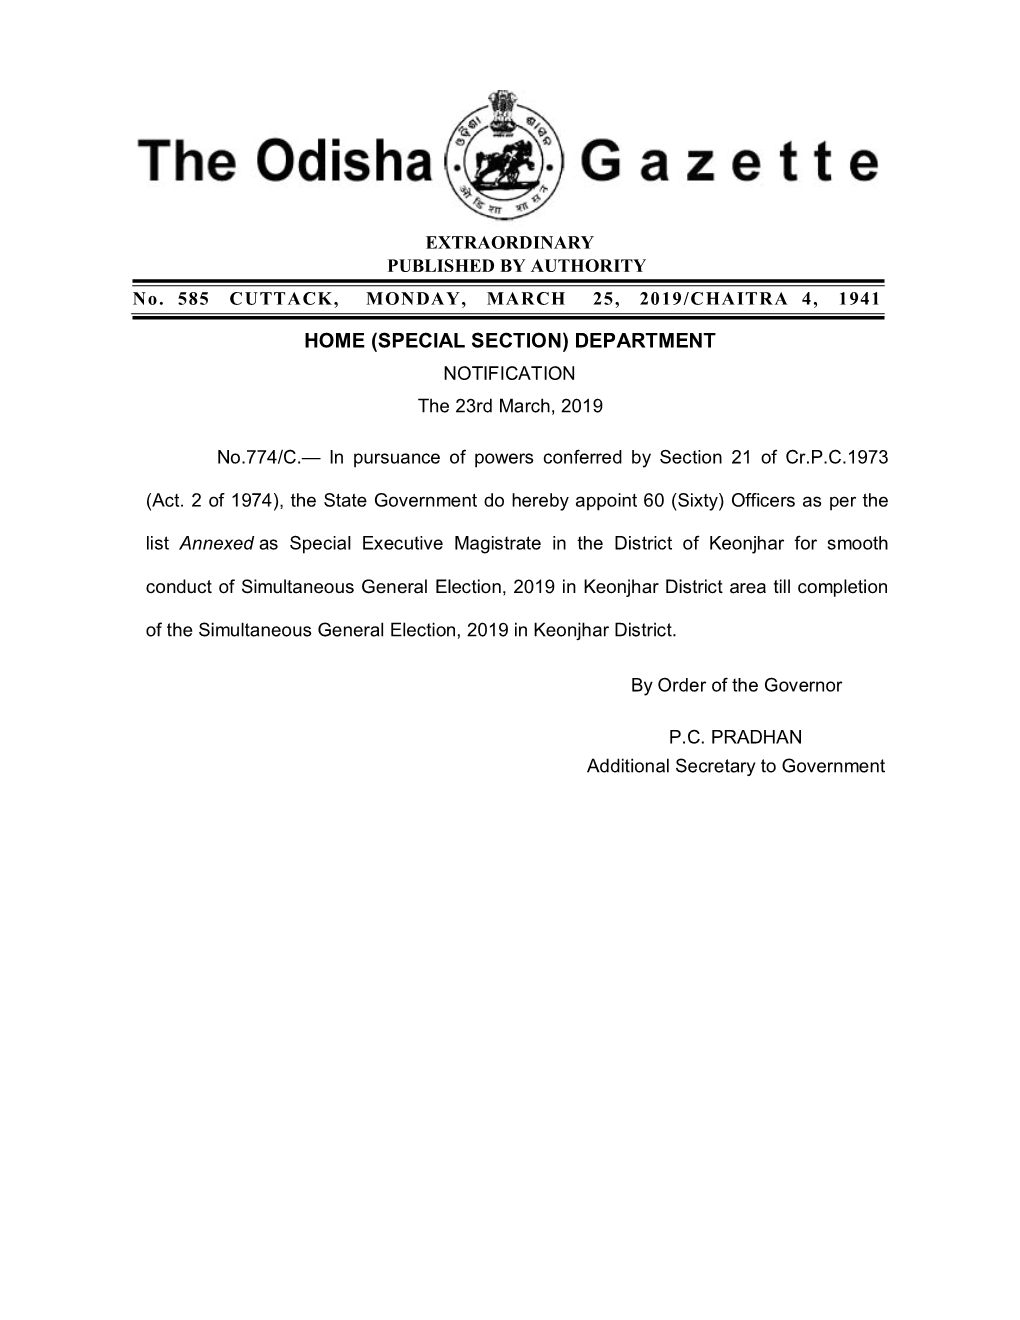 HOME (SPECIAL SECTION) DEPARTMENT NOTIFICATION the 23Rd March, 2019